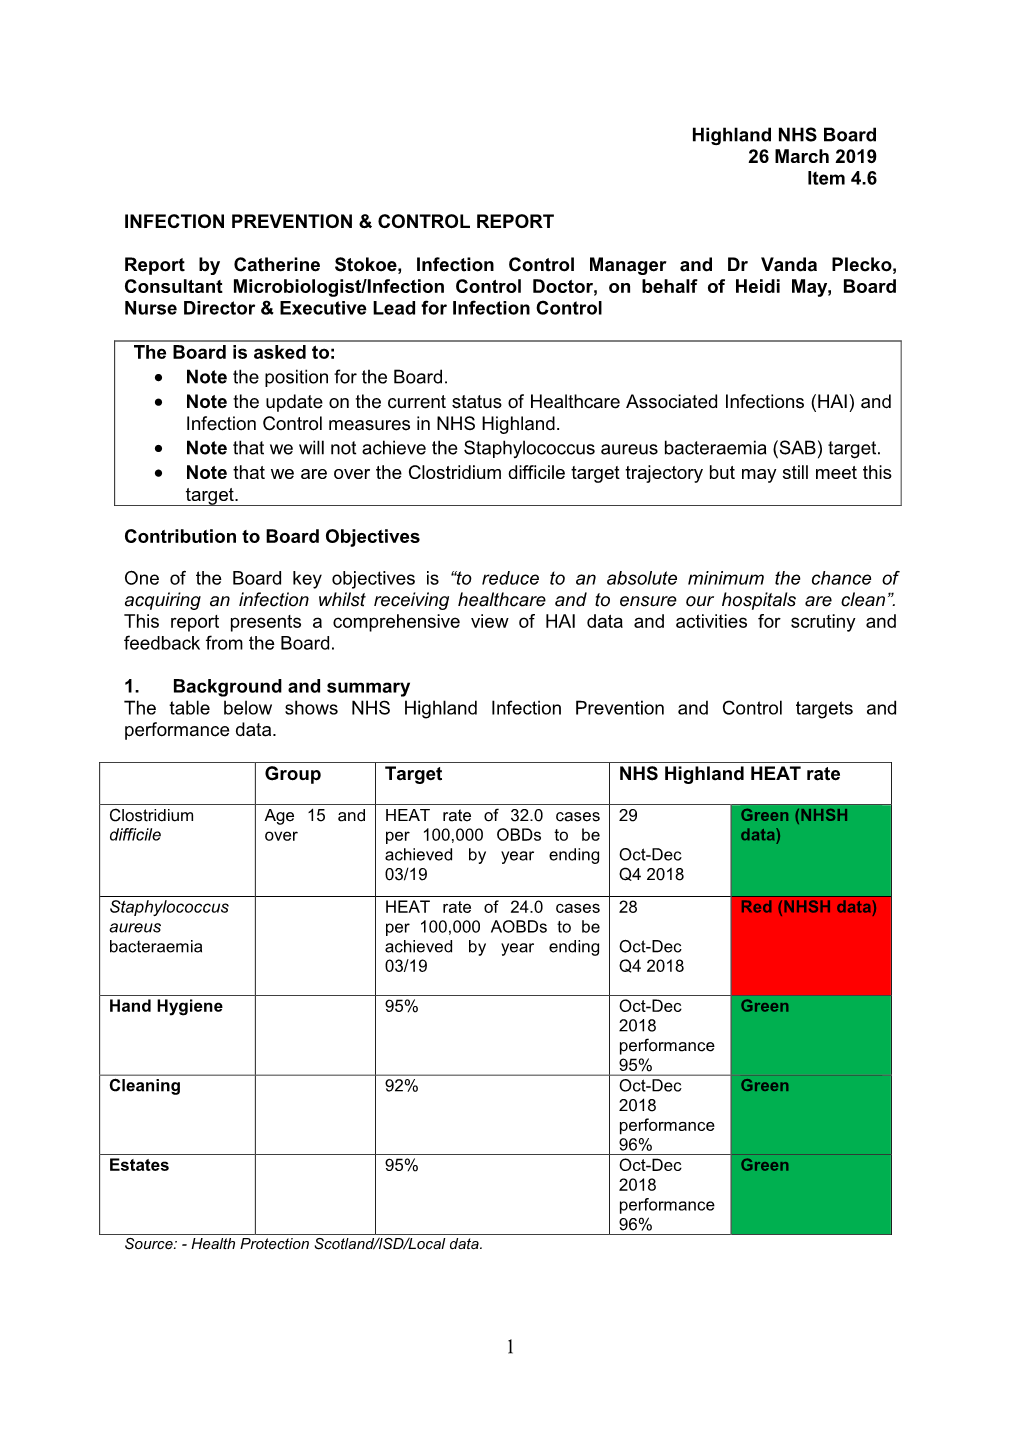 Highland NHS Board 26 March 2019 Item 4.6 INFECTION PREVENTION & CONTROL REPORT Report by Catherine Stokoe, Infectio